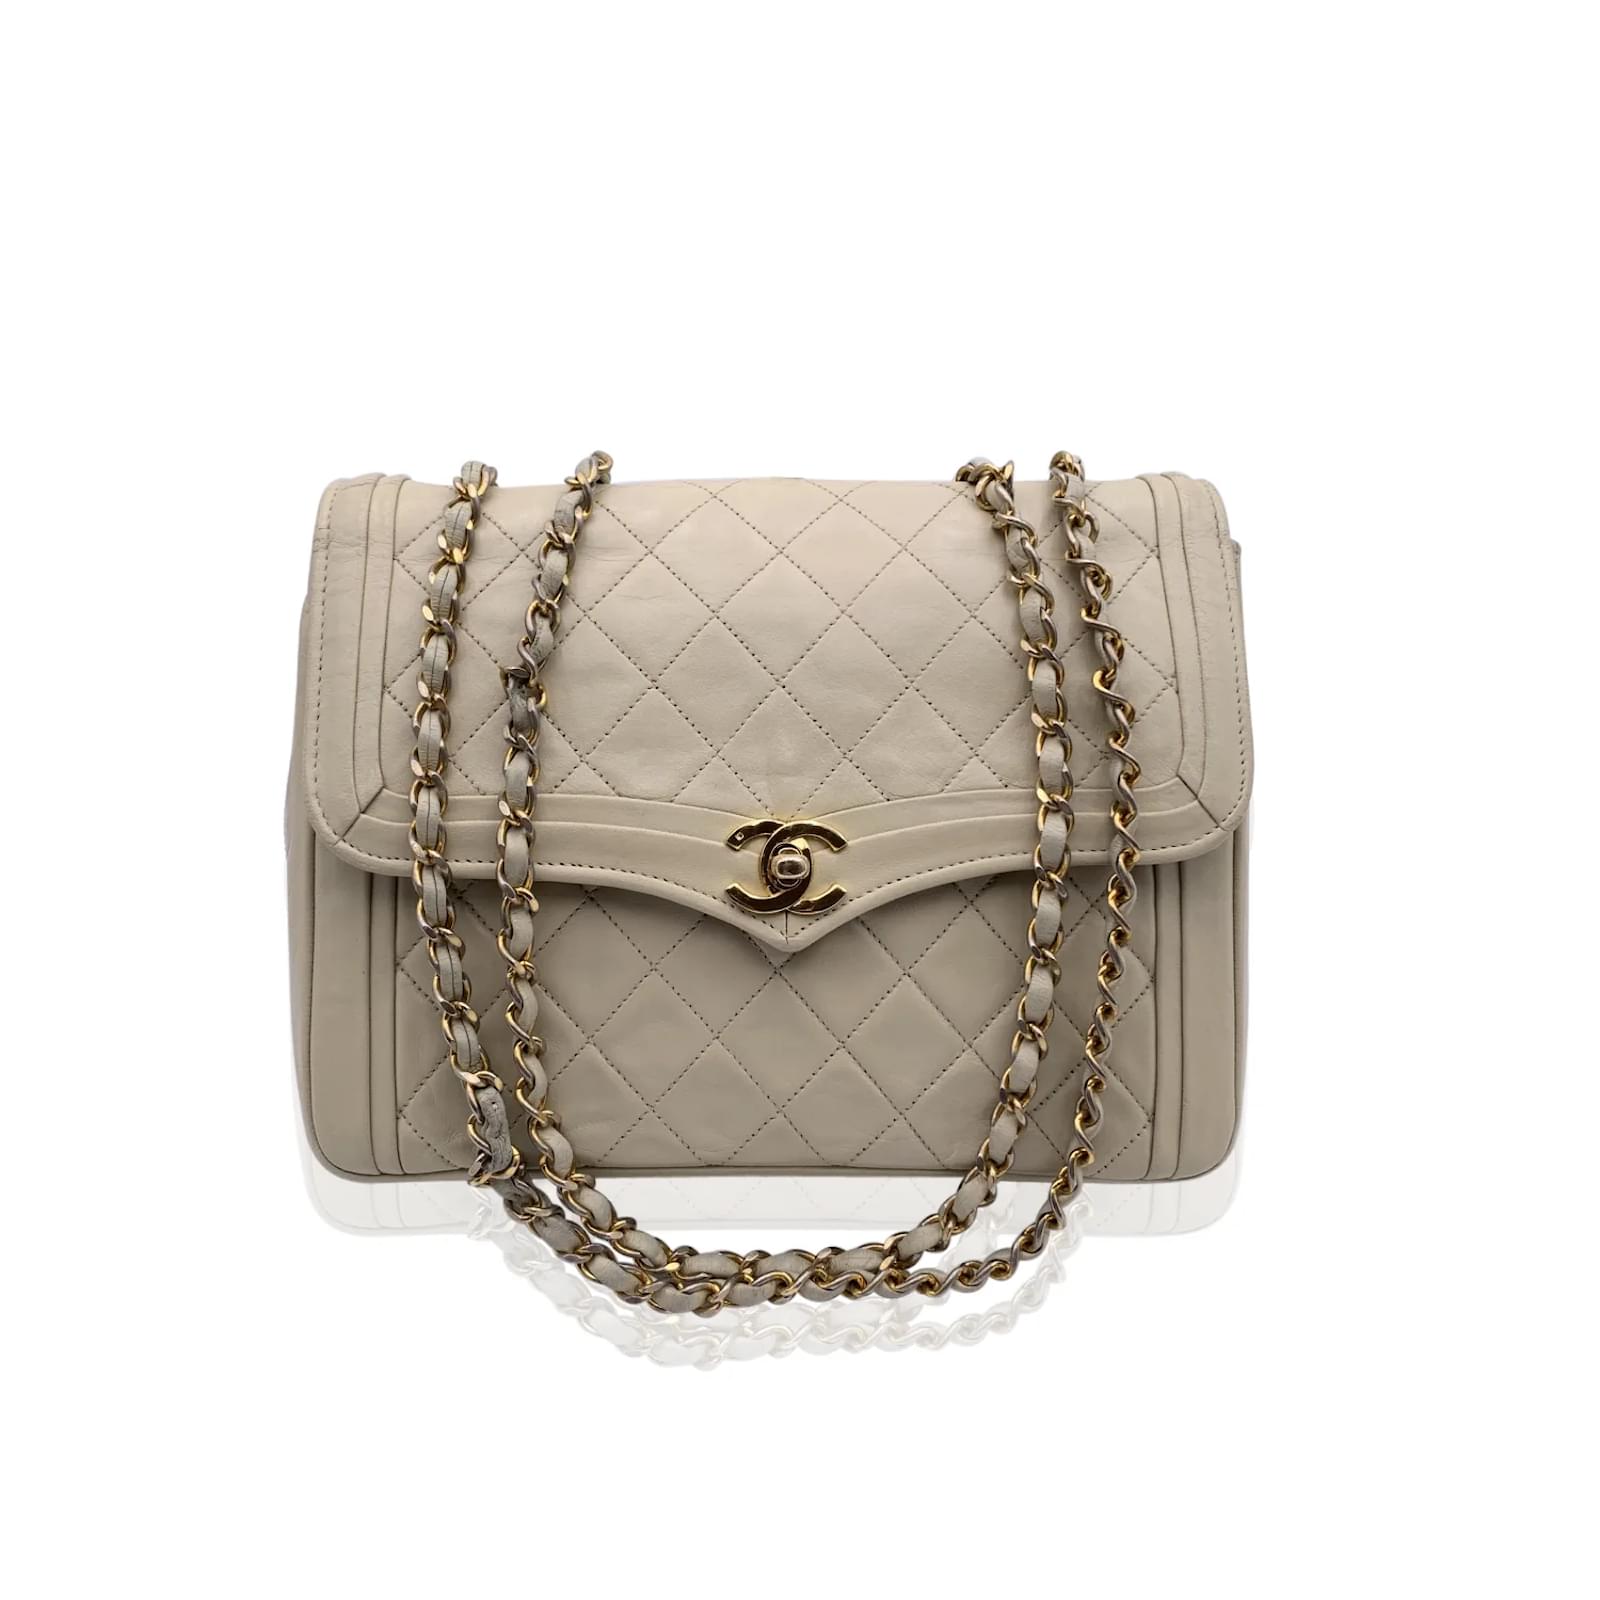 Chanel Vintage Beige Quilted Leather Diana Crossbody Bag ref